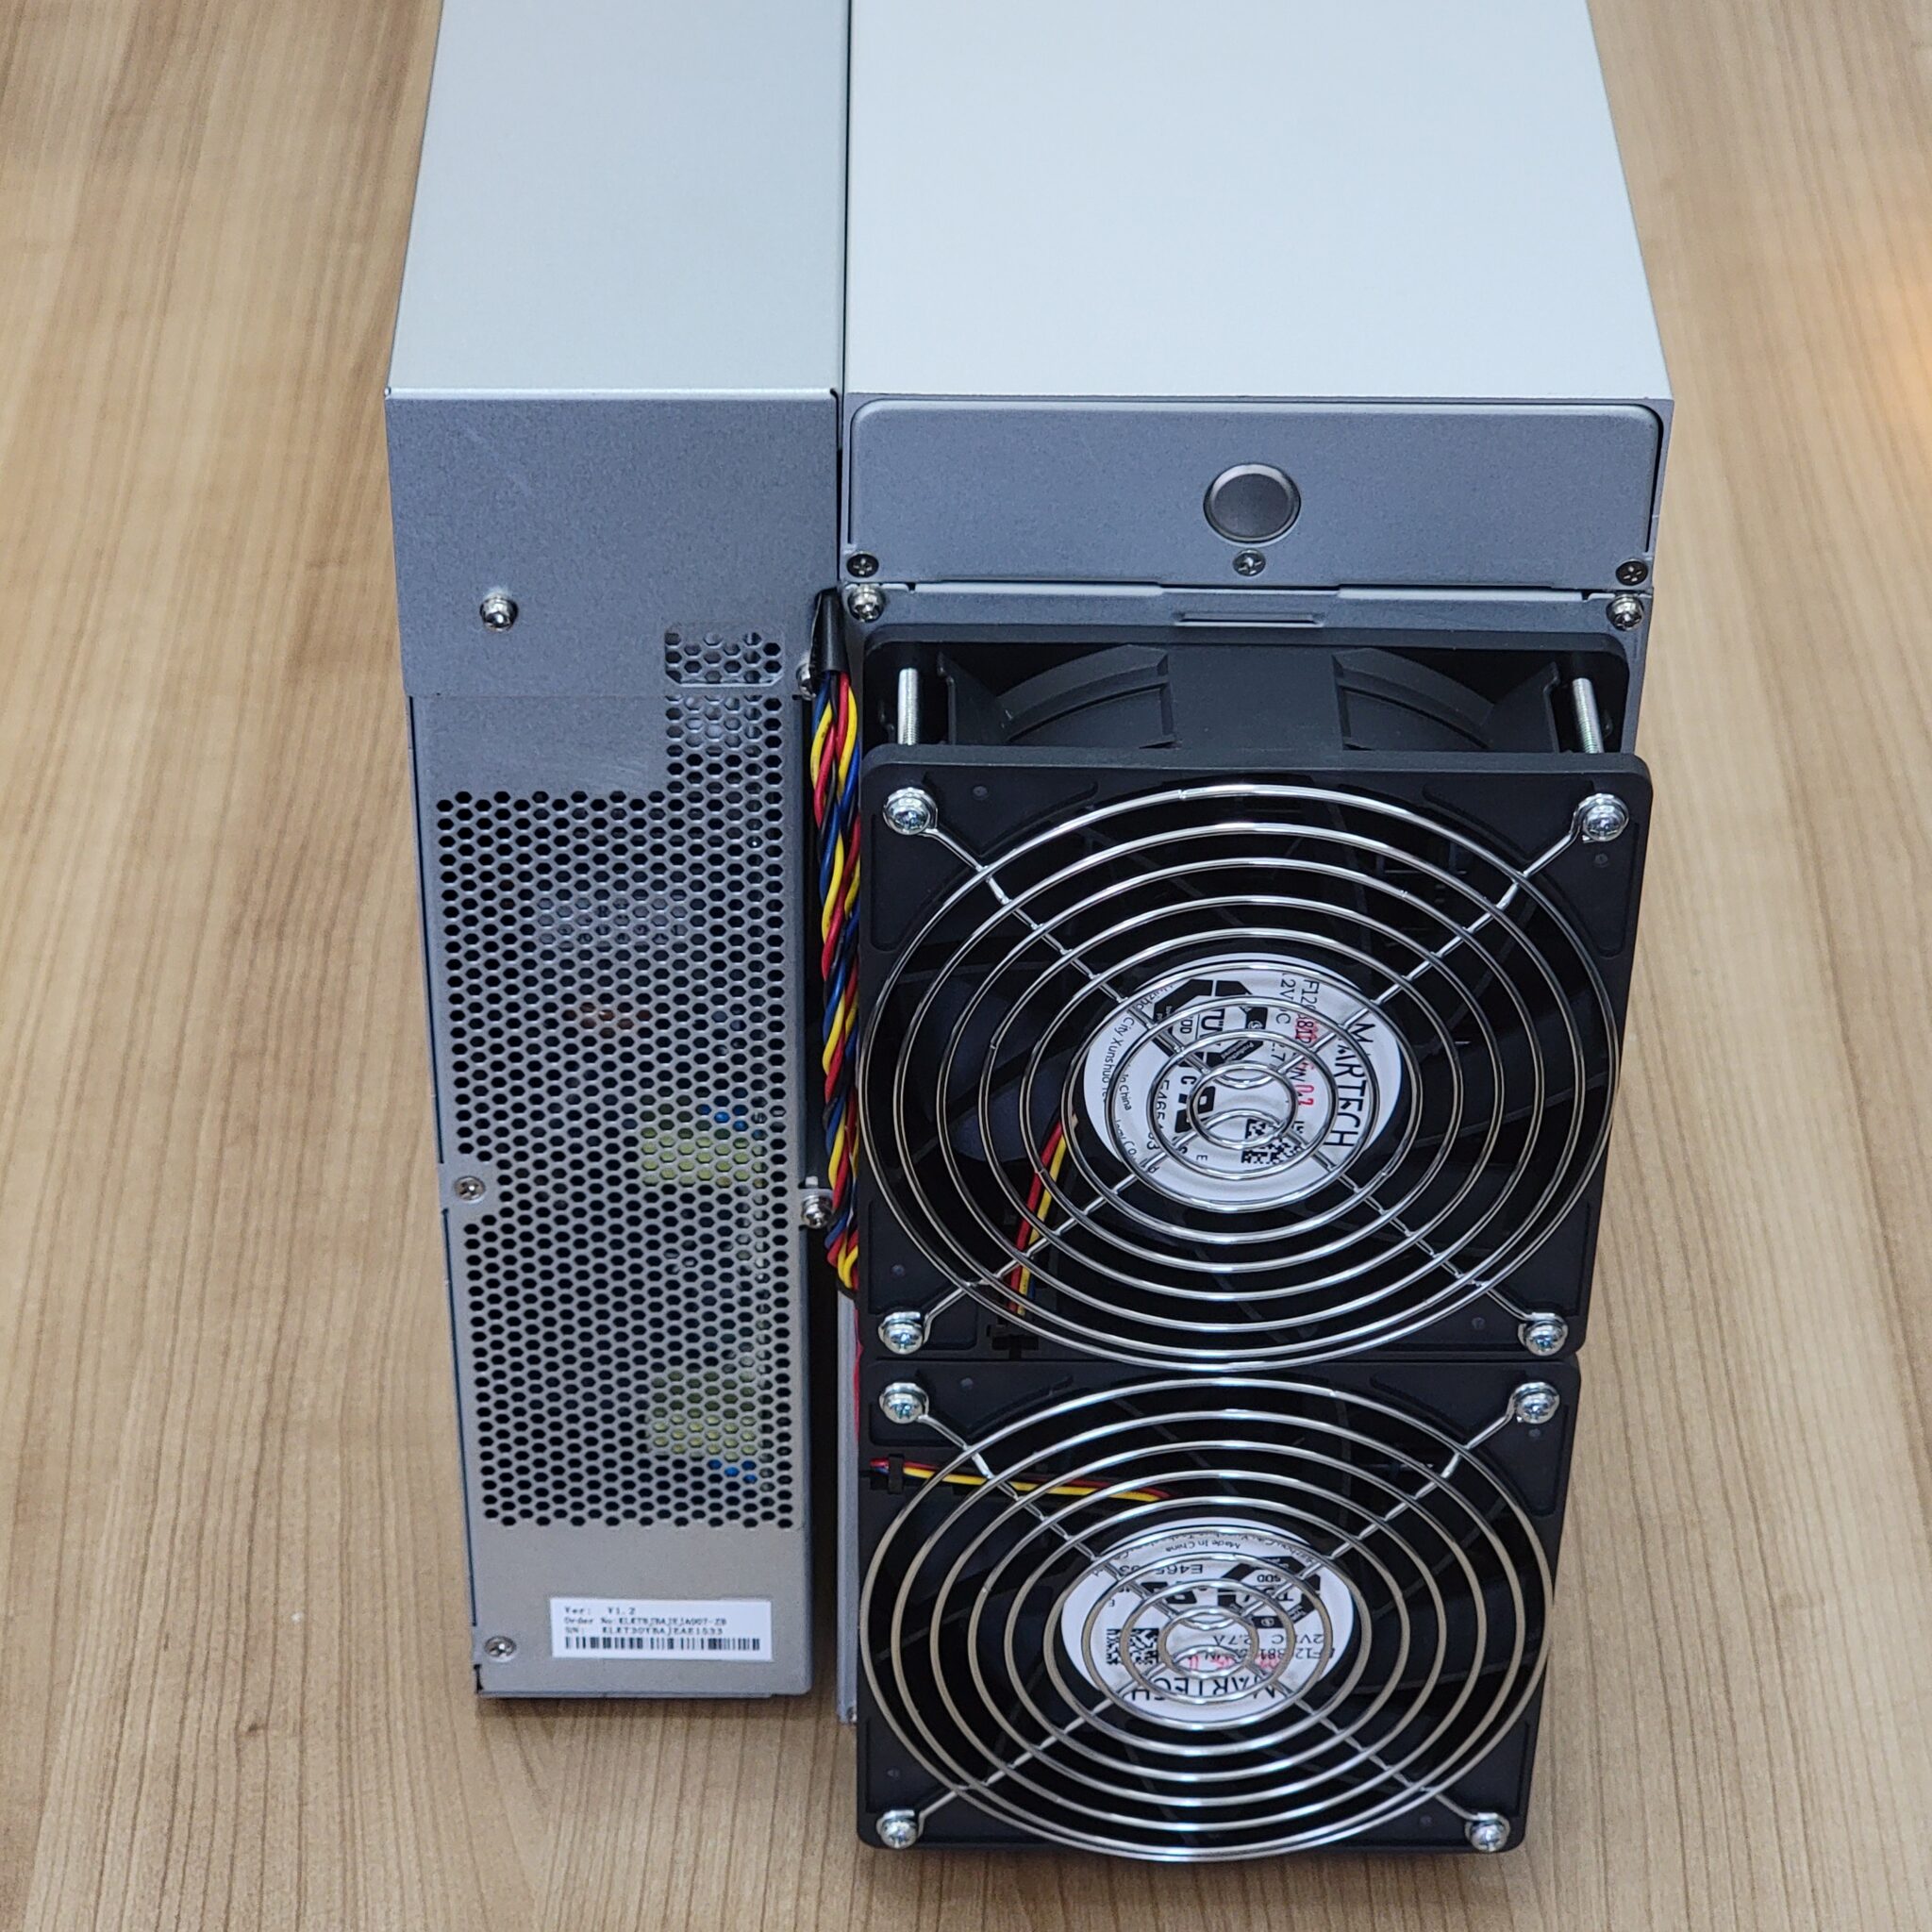 Antminer s21 hydro 335 th s. Antminer t19. Antminer t19 88th. S19 95t асик. ASIC s19 Hydro.